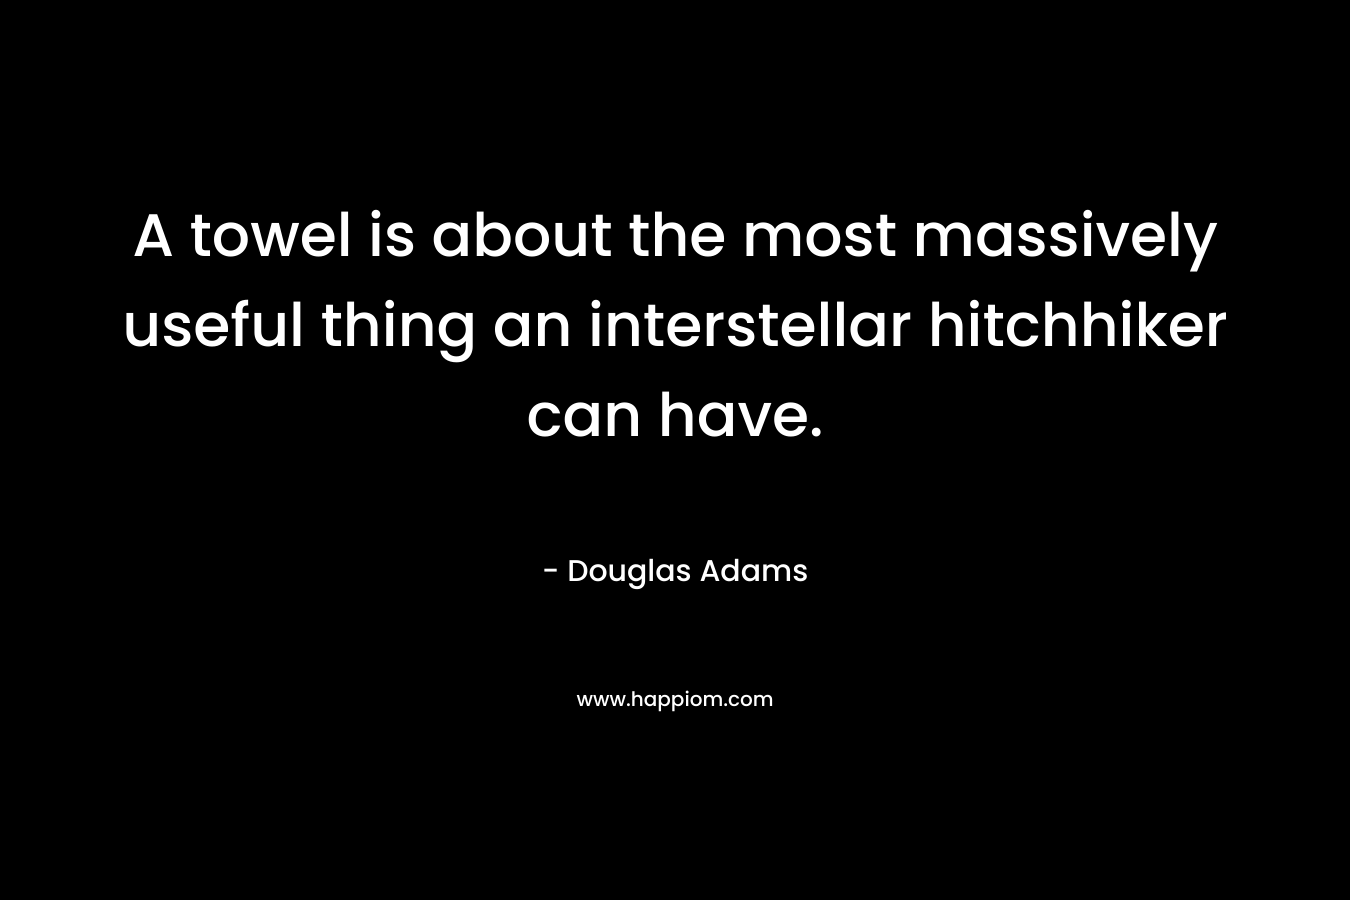 A towel is about the most massively useful thing an interstellar hitchhiker can have. – Douglas Adams